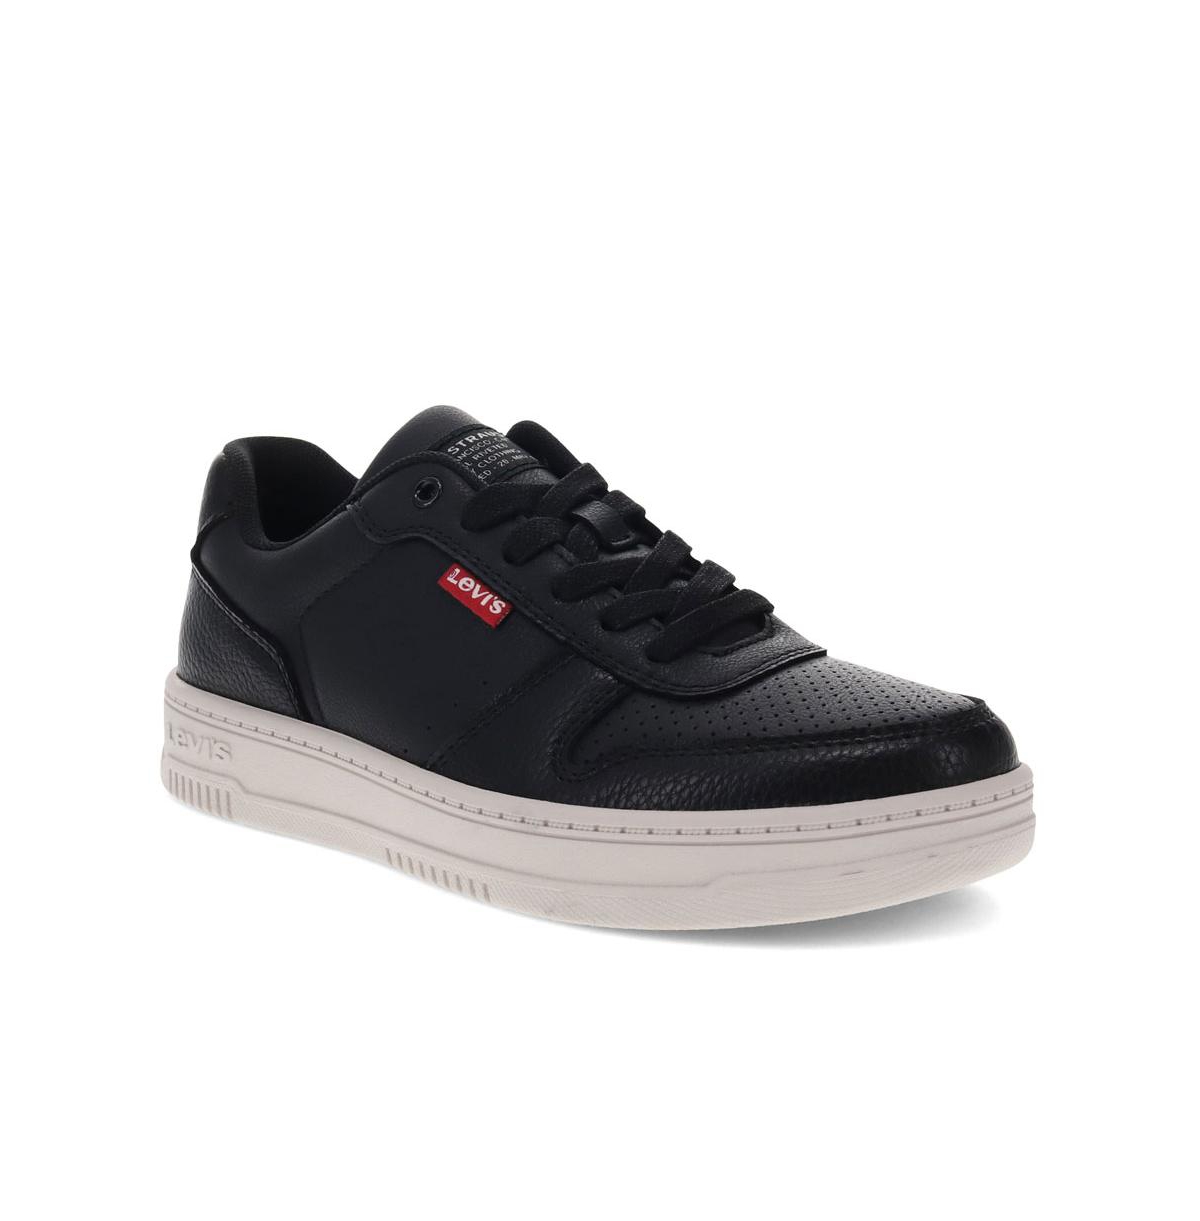 Levi's Women's Drive Lo Synthetic Leather Casual Lace Up Sneaker Shoe In Black